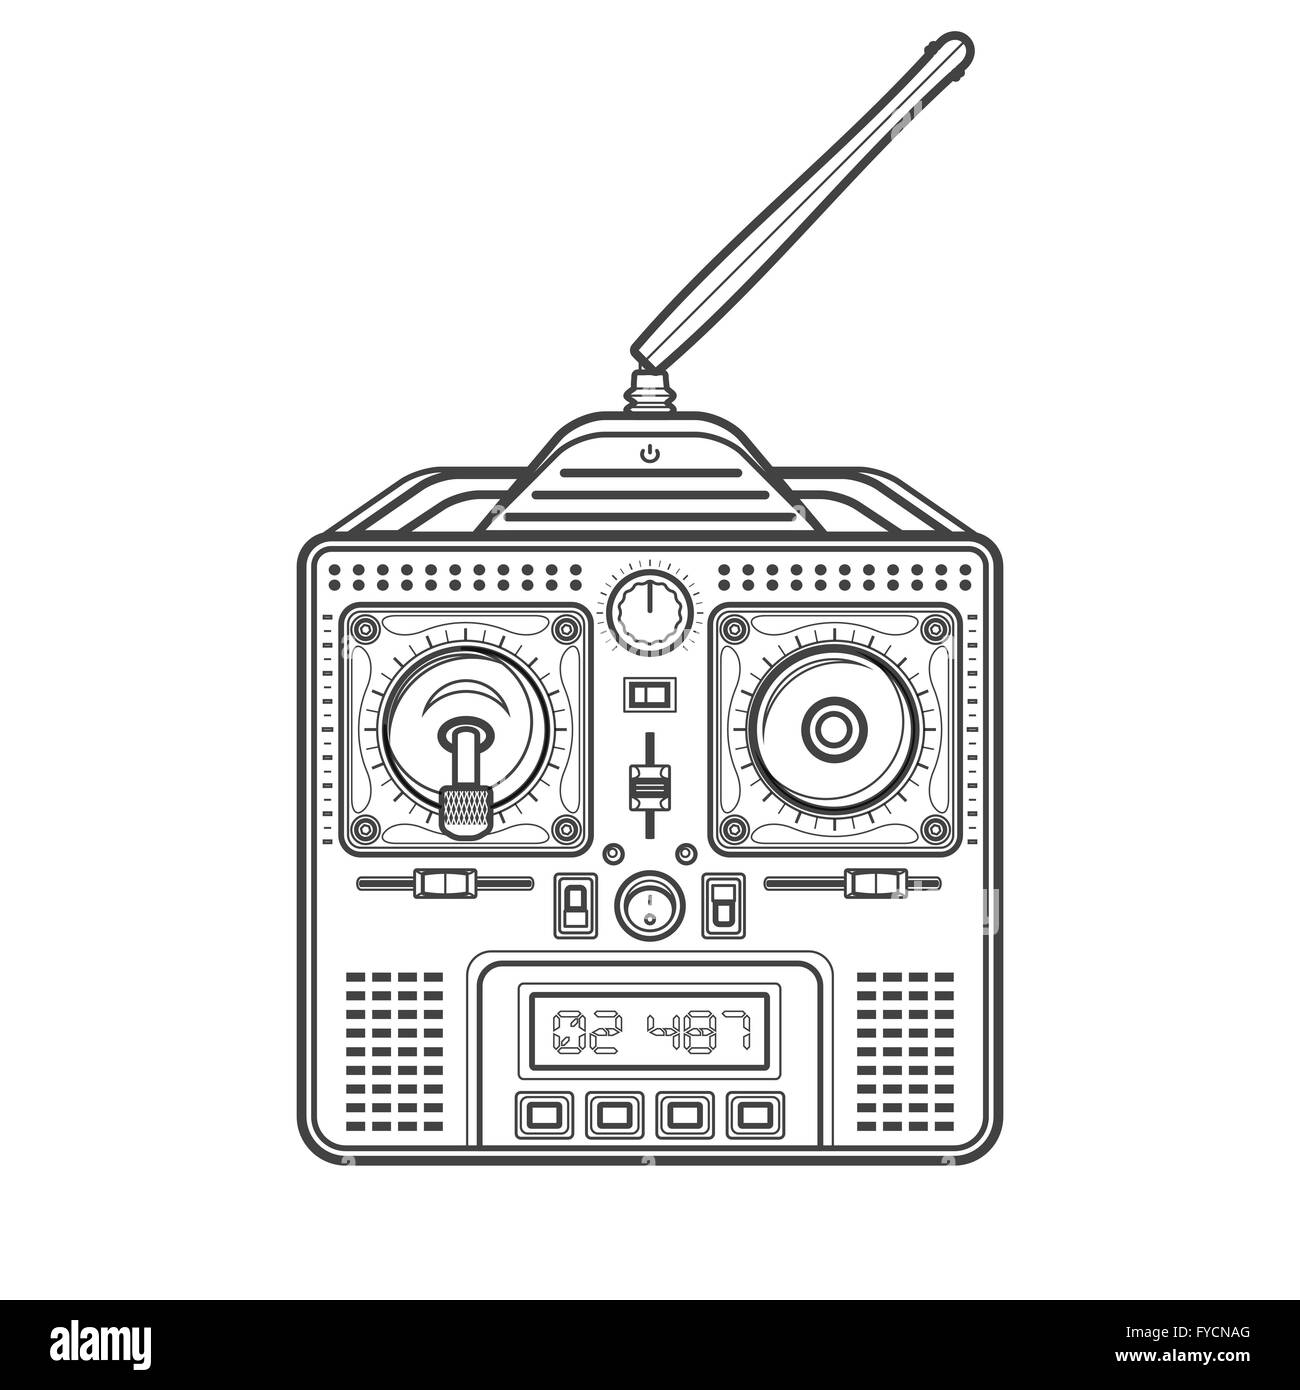 vector black outline design drone radio remote control transmitter isolated illustration white background Stock Vector